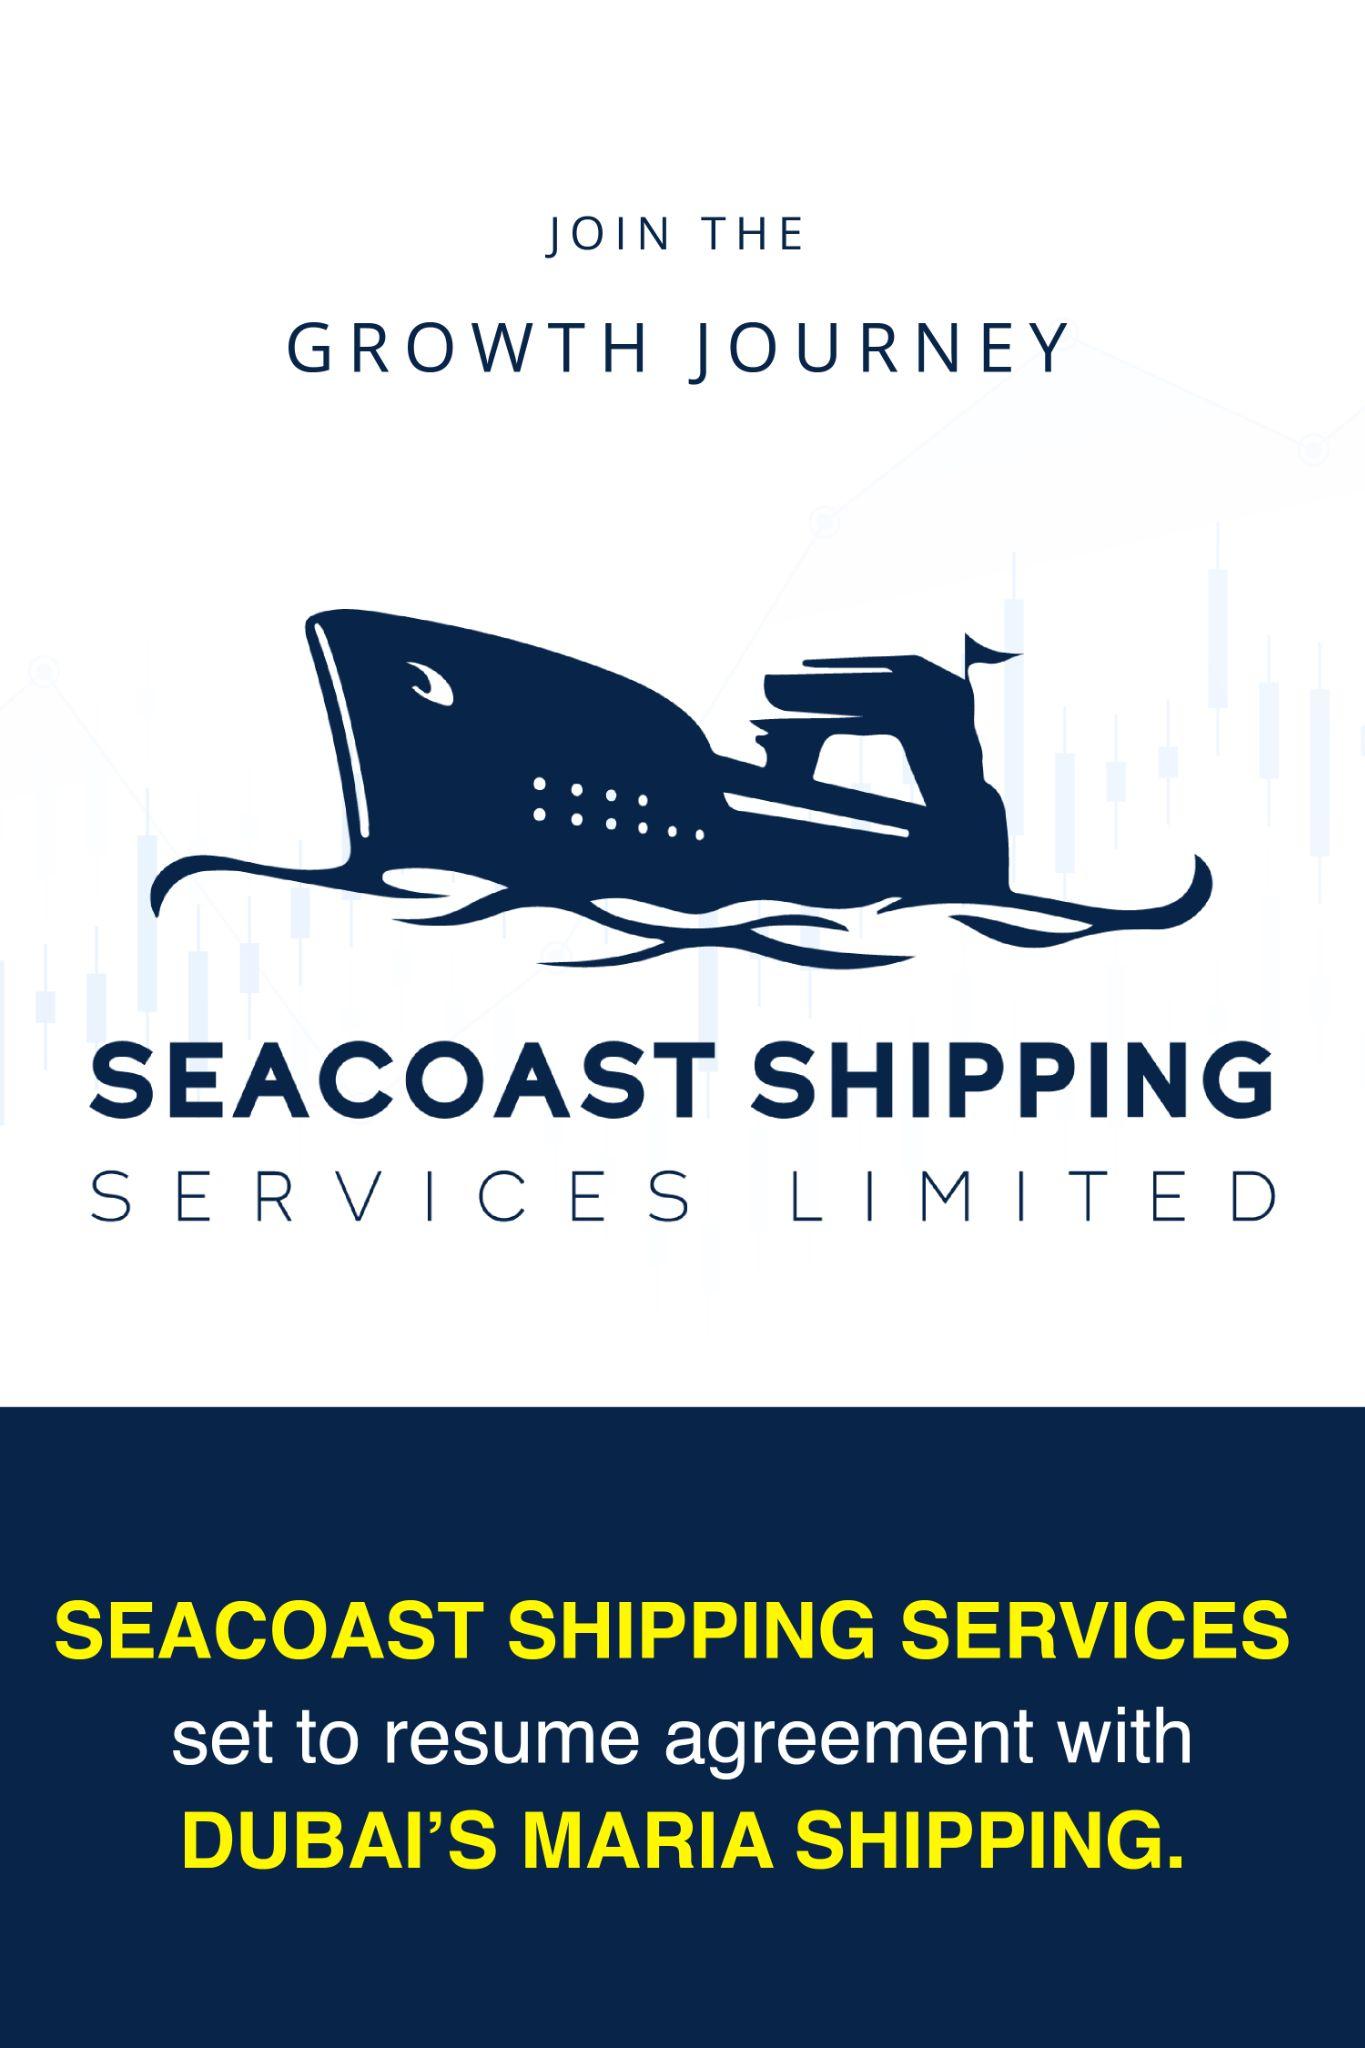 Seacoast Shipping Services Set To Resume Agreement With Dubai’s Maria Shipping